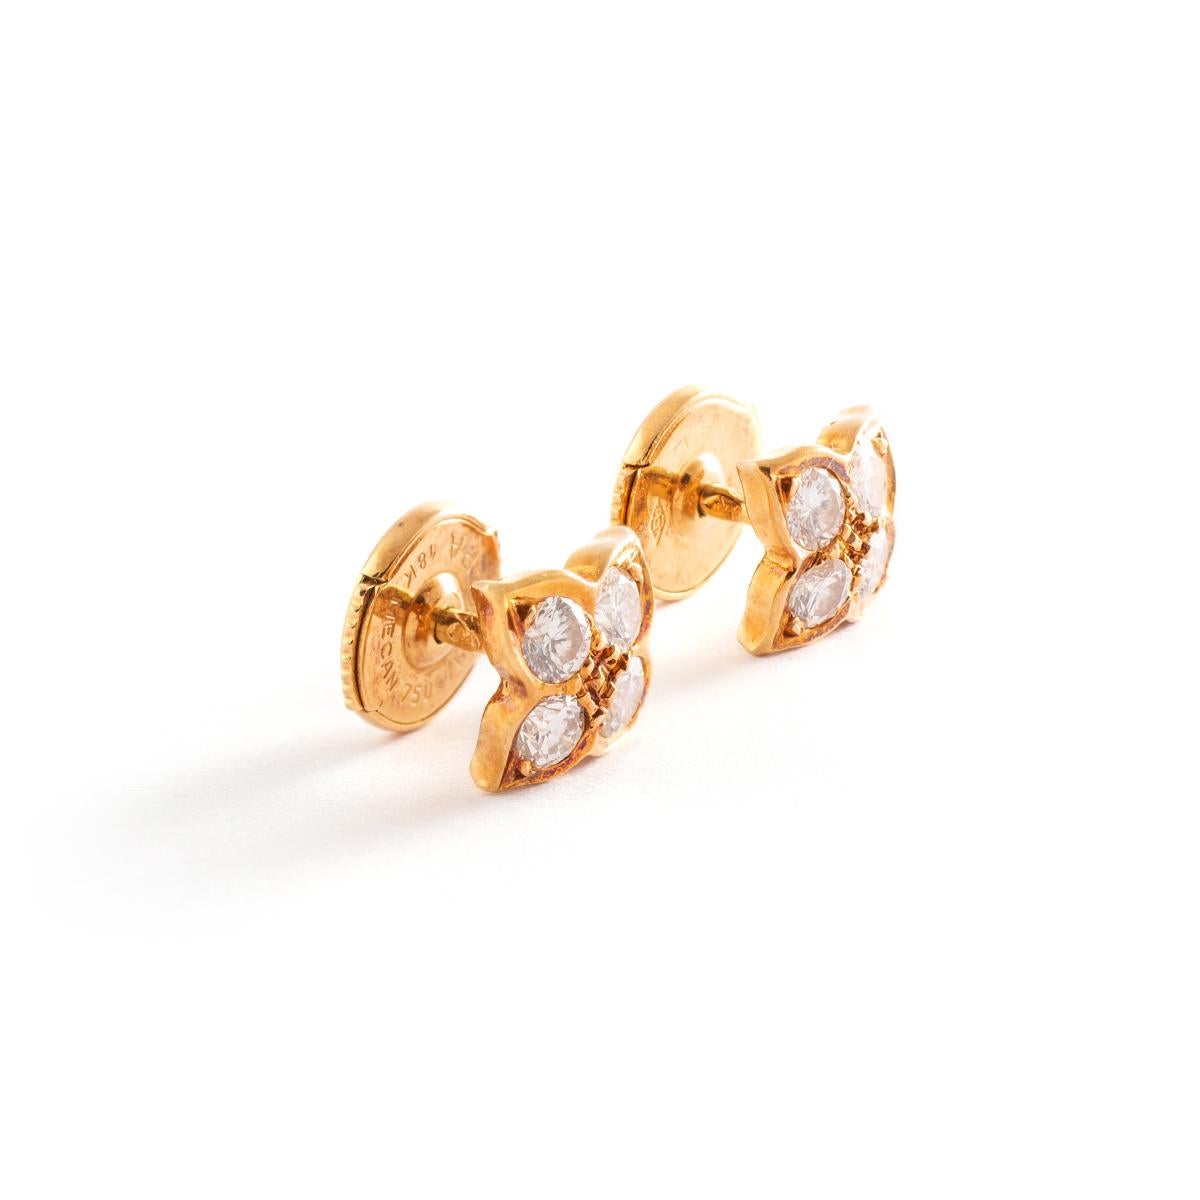 Ear Studs Earrings Floral Diamond Yellow Gold.
8 round cut Diamonds each one 2.17 millimeters diameter.
Approximately 0.30 carat total.
Diameter: 0.75 centimeters.
Gross weight: 2.38 grams.